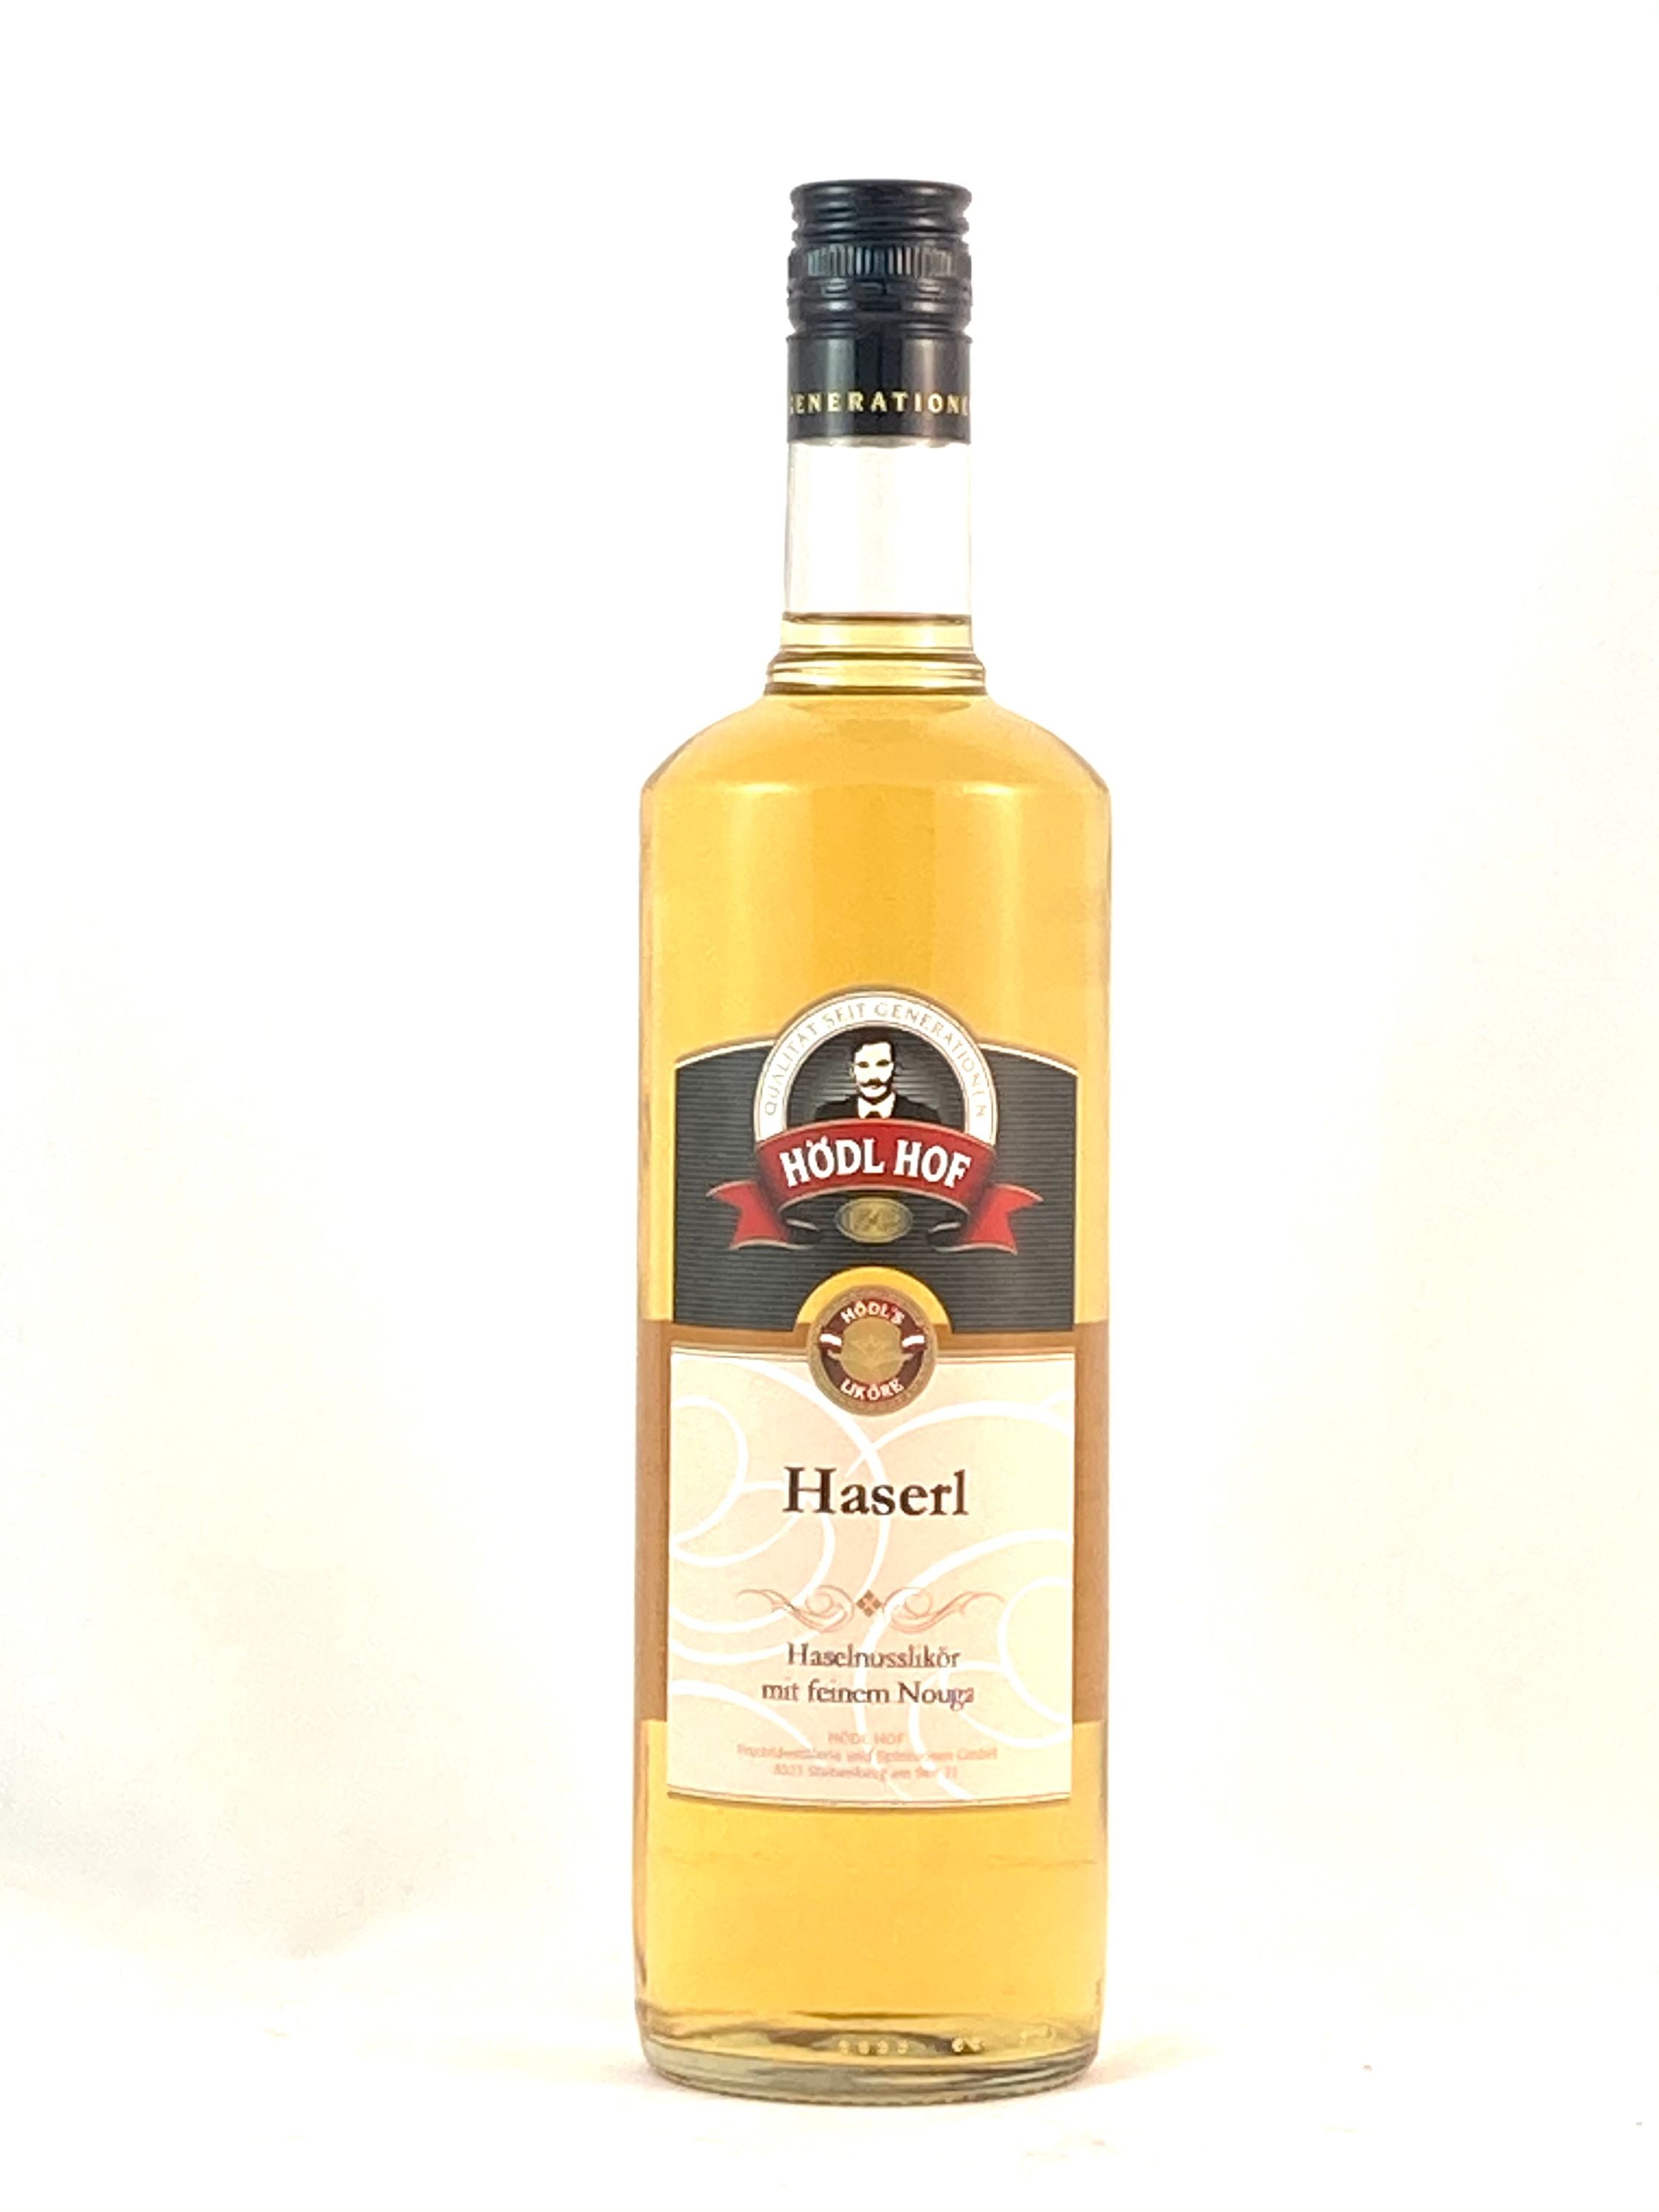 Hödl Hof Haserl 1.0l, alc. 20% by volume